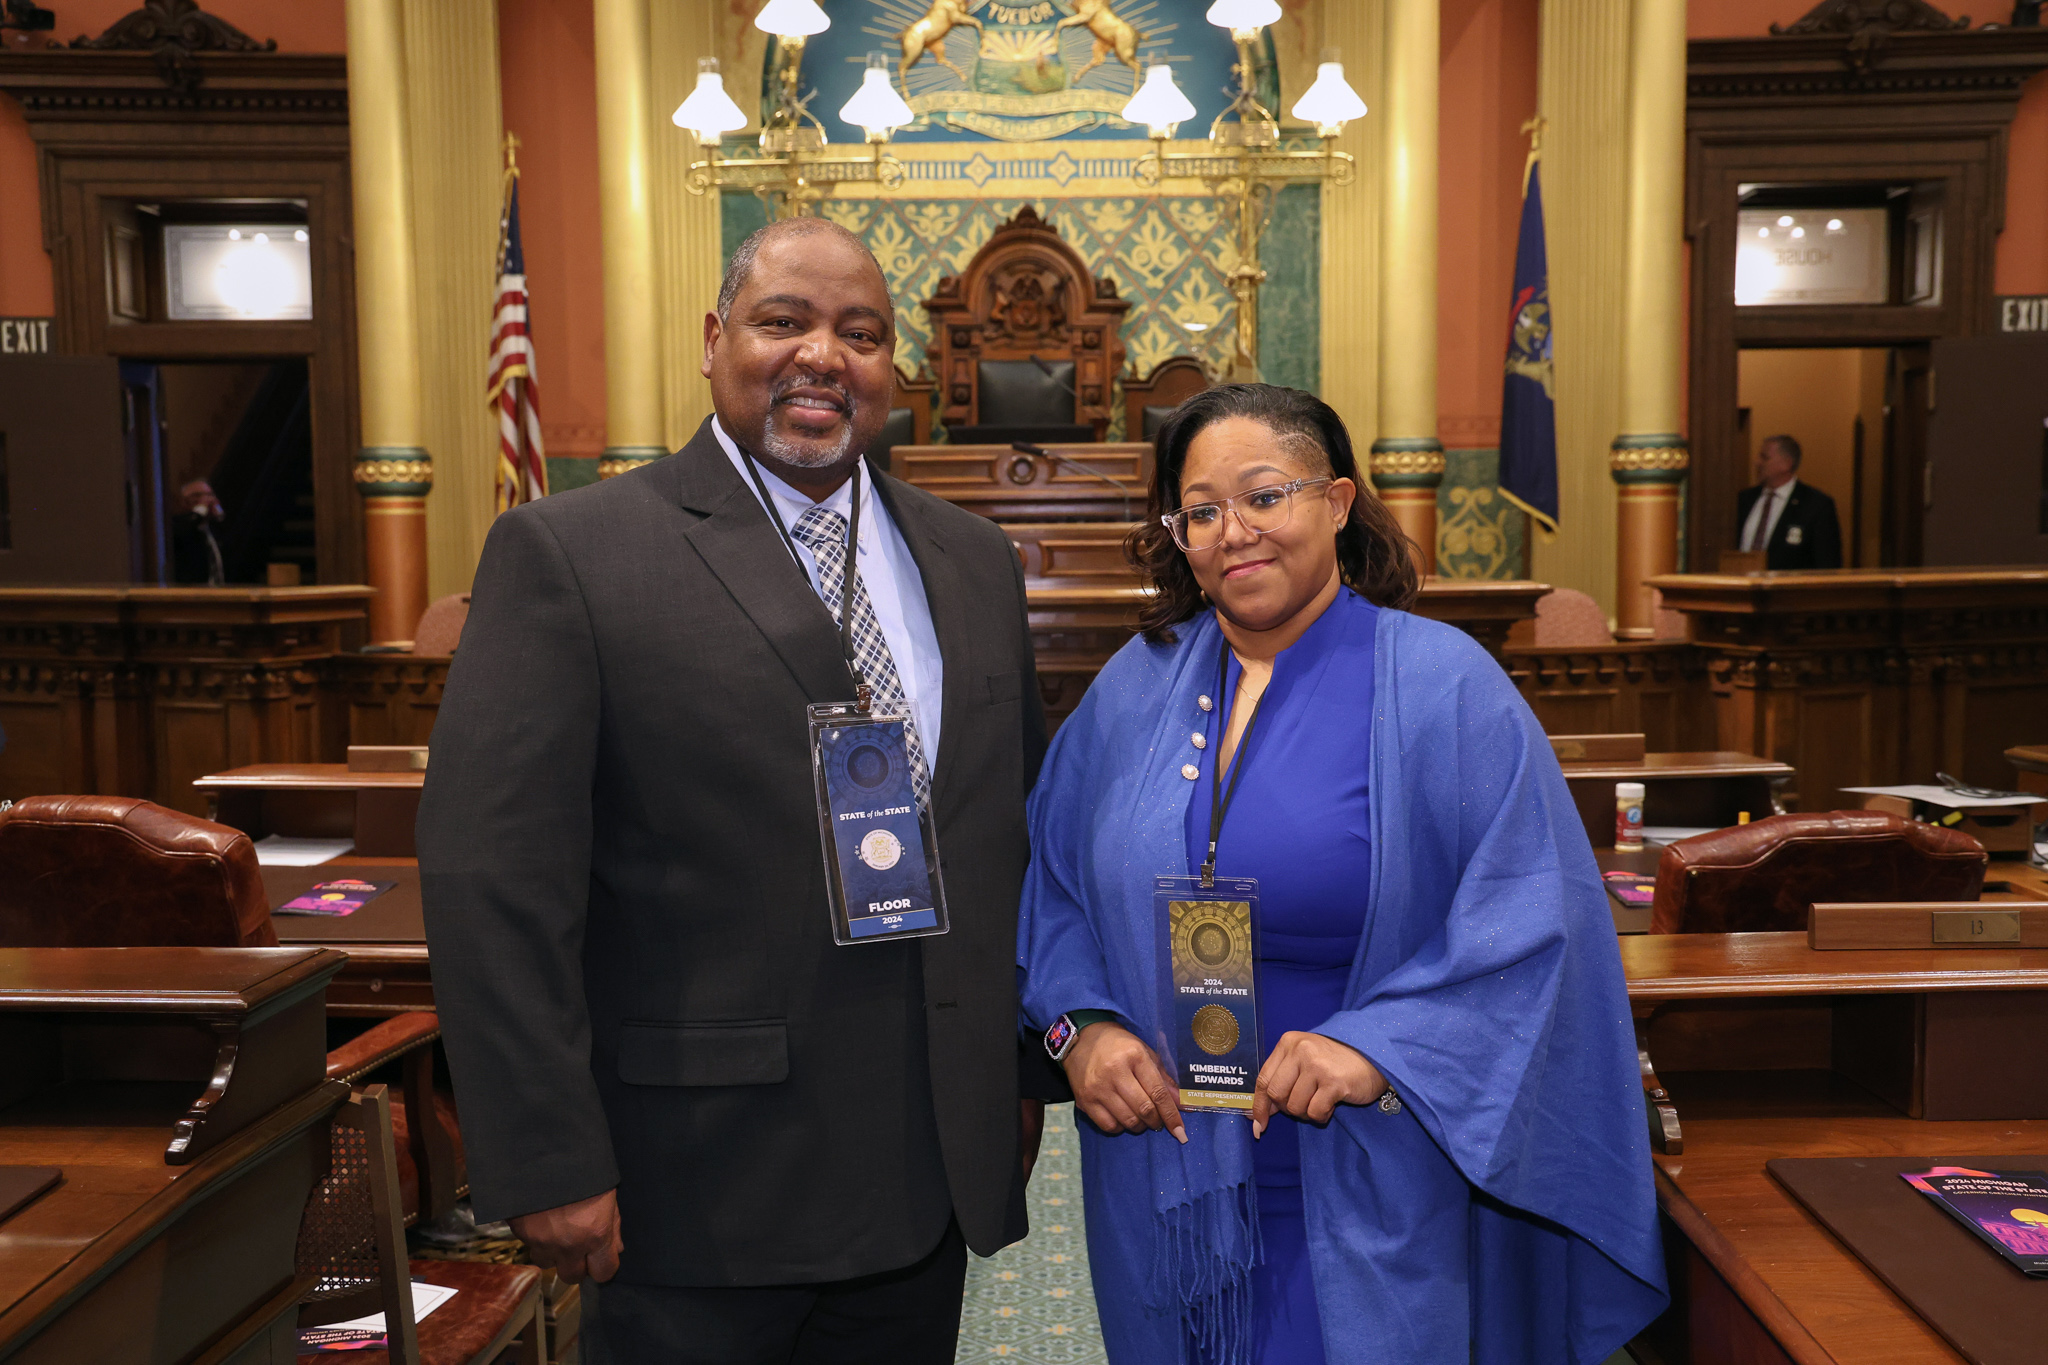 State Rep. Kimberly Edwards stands with Detroit Police Commander Lawrence Purifoy on the Michigan House floor.